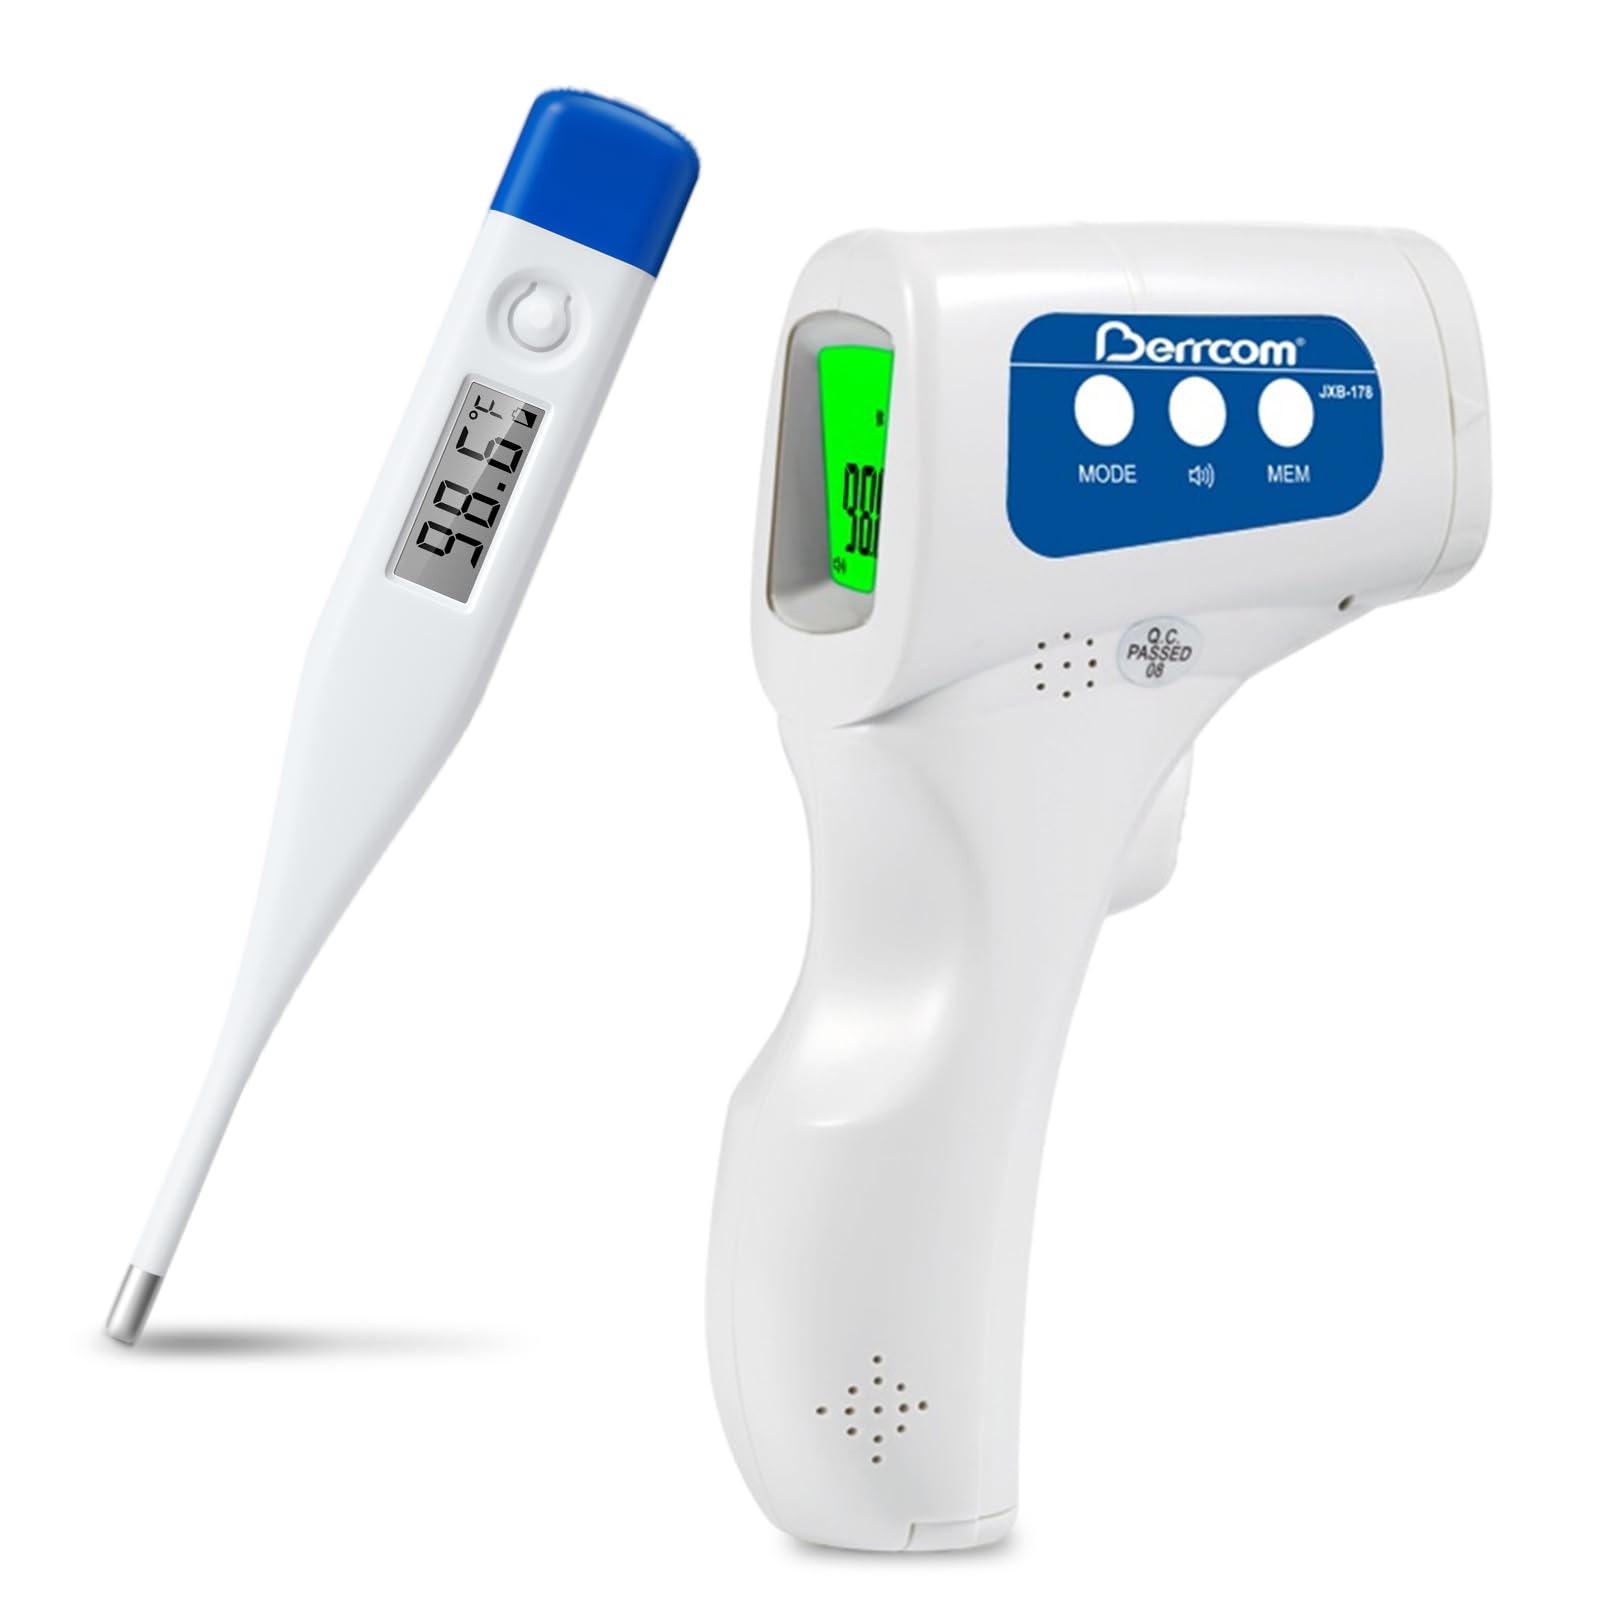 [Value Bundle] Berrcom Digital Thermometer DT007 & Berrcom Digital Non Contact Infrared Forehead Thermometer JXB178